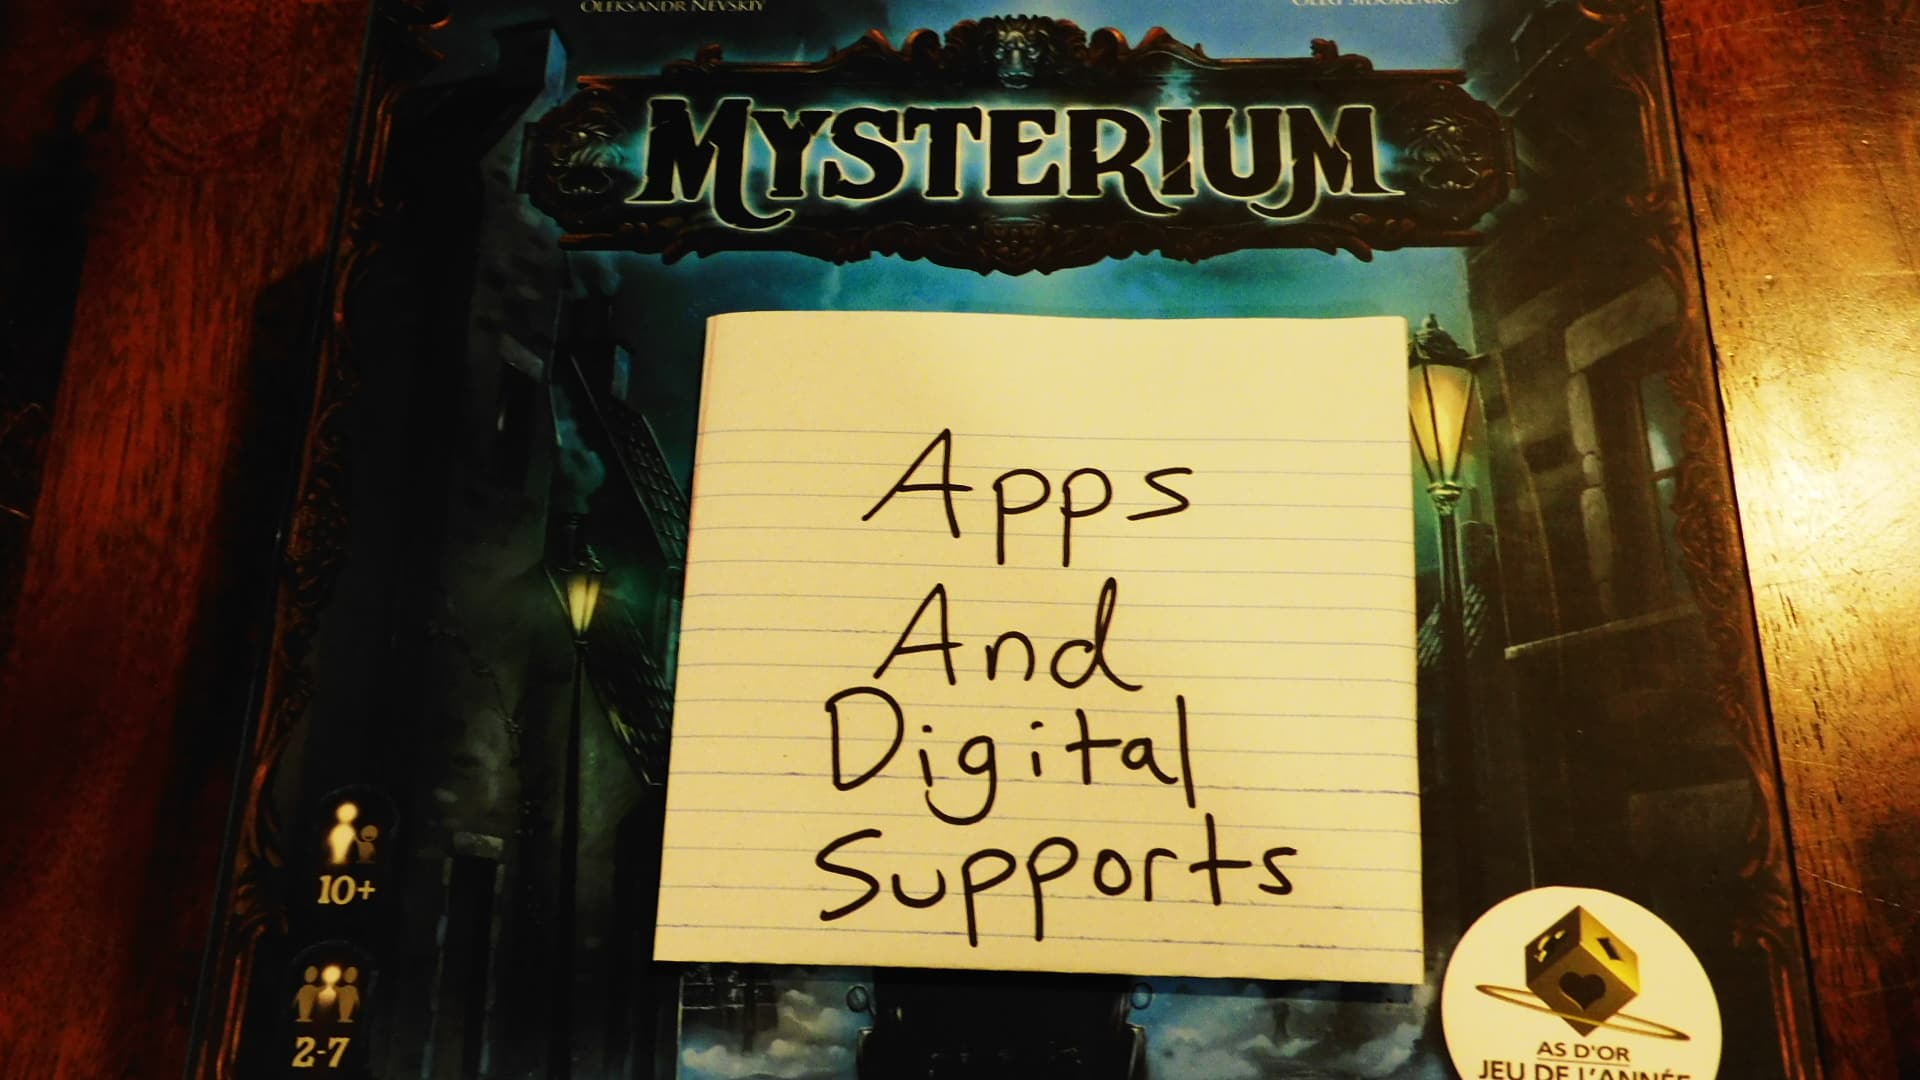 Best Mysterium Apps And Digital Supports